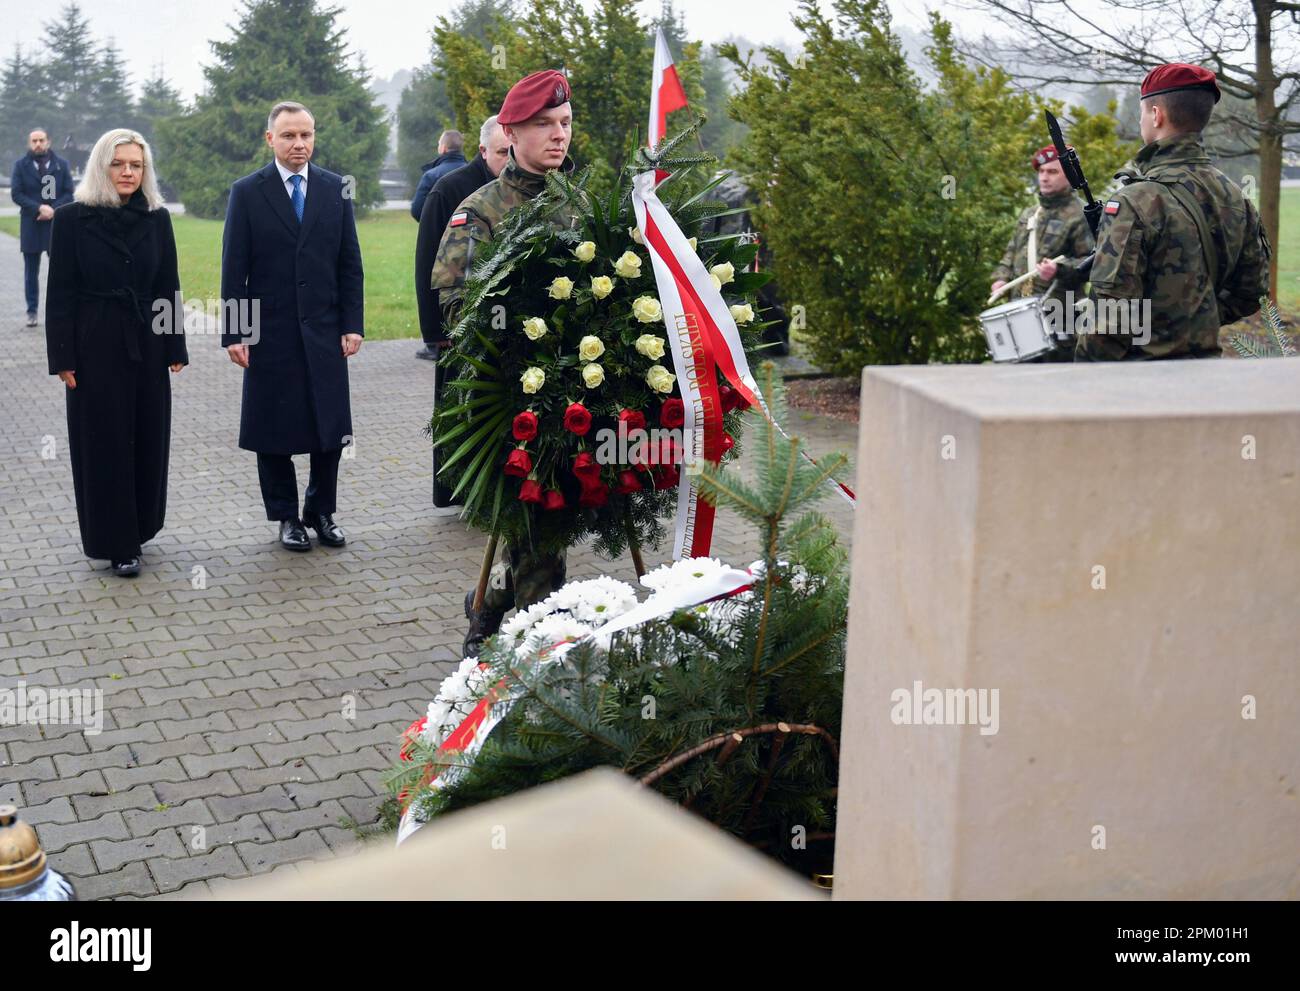 Malgorzata Wassermann (daughter of Zbigniew Wassermann) and the President of Poland Andrzej Duda seen at the grave of Zbigniew Wassermann, during the 13th anniversary Cemetery of his death in Bielany, Krakow. President Andrzej Duda attends the 13th anniversary of the government plane (TU154M) crash in Smolensk. The delegation led by President Lech Kaczynski died on the way to the ceremony in Katyn on April 10, 2010. 96 people were killed, including the President of the Republic of Poland Lech Kaczynski, and his wife, MPs, ministers, senators, military commanders, and others. (Photo by Alex Bon Stock Photo